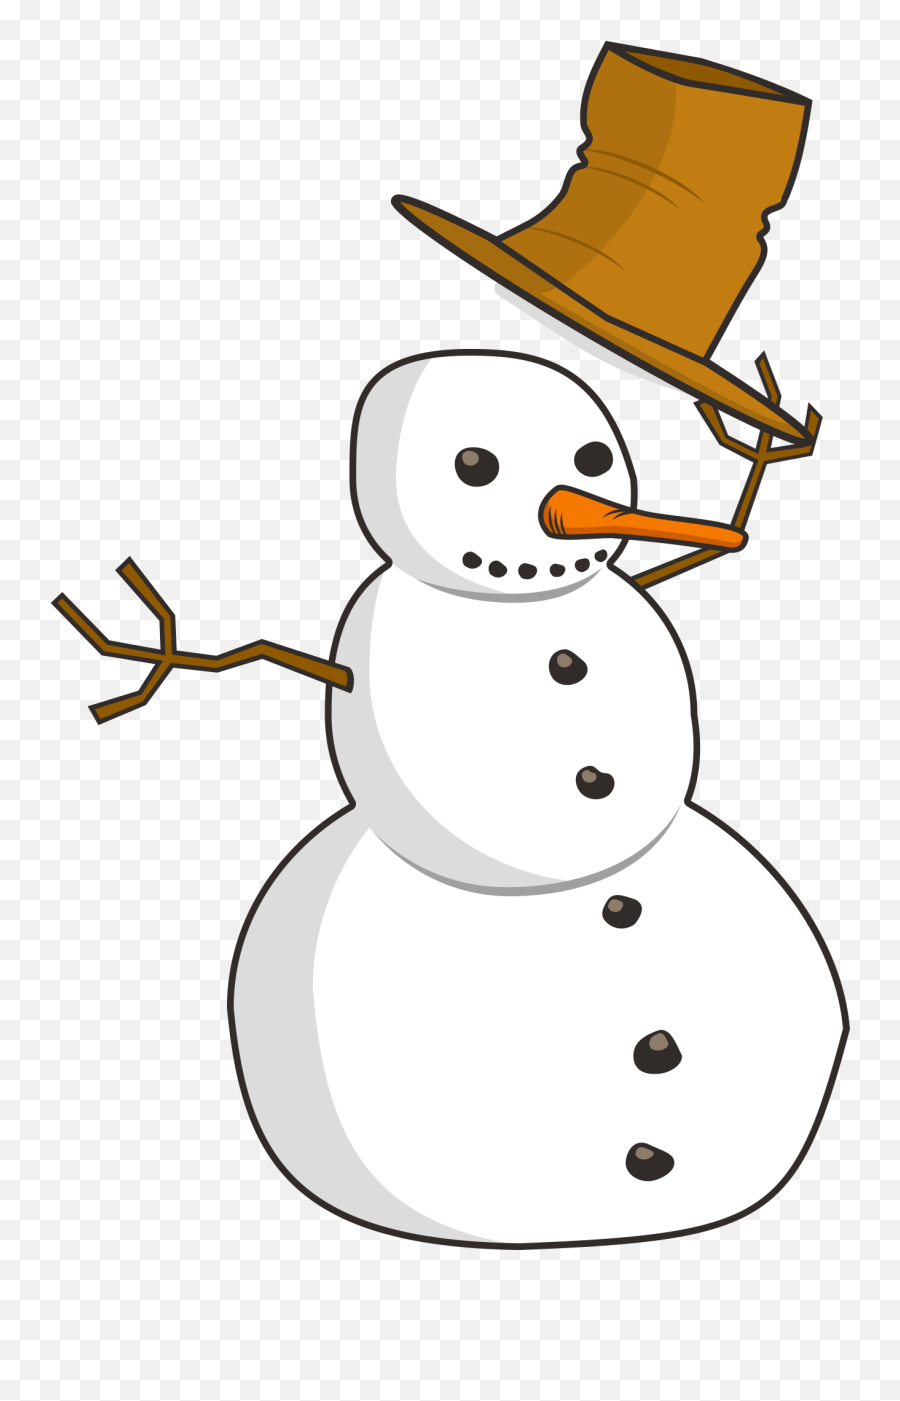 Snowman Clipart Png In This 2 Piece Svg And - Christmas Snowman Clipart Free Download Transparent Creazilla,Snowman Icon Png